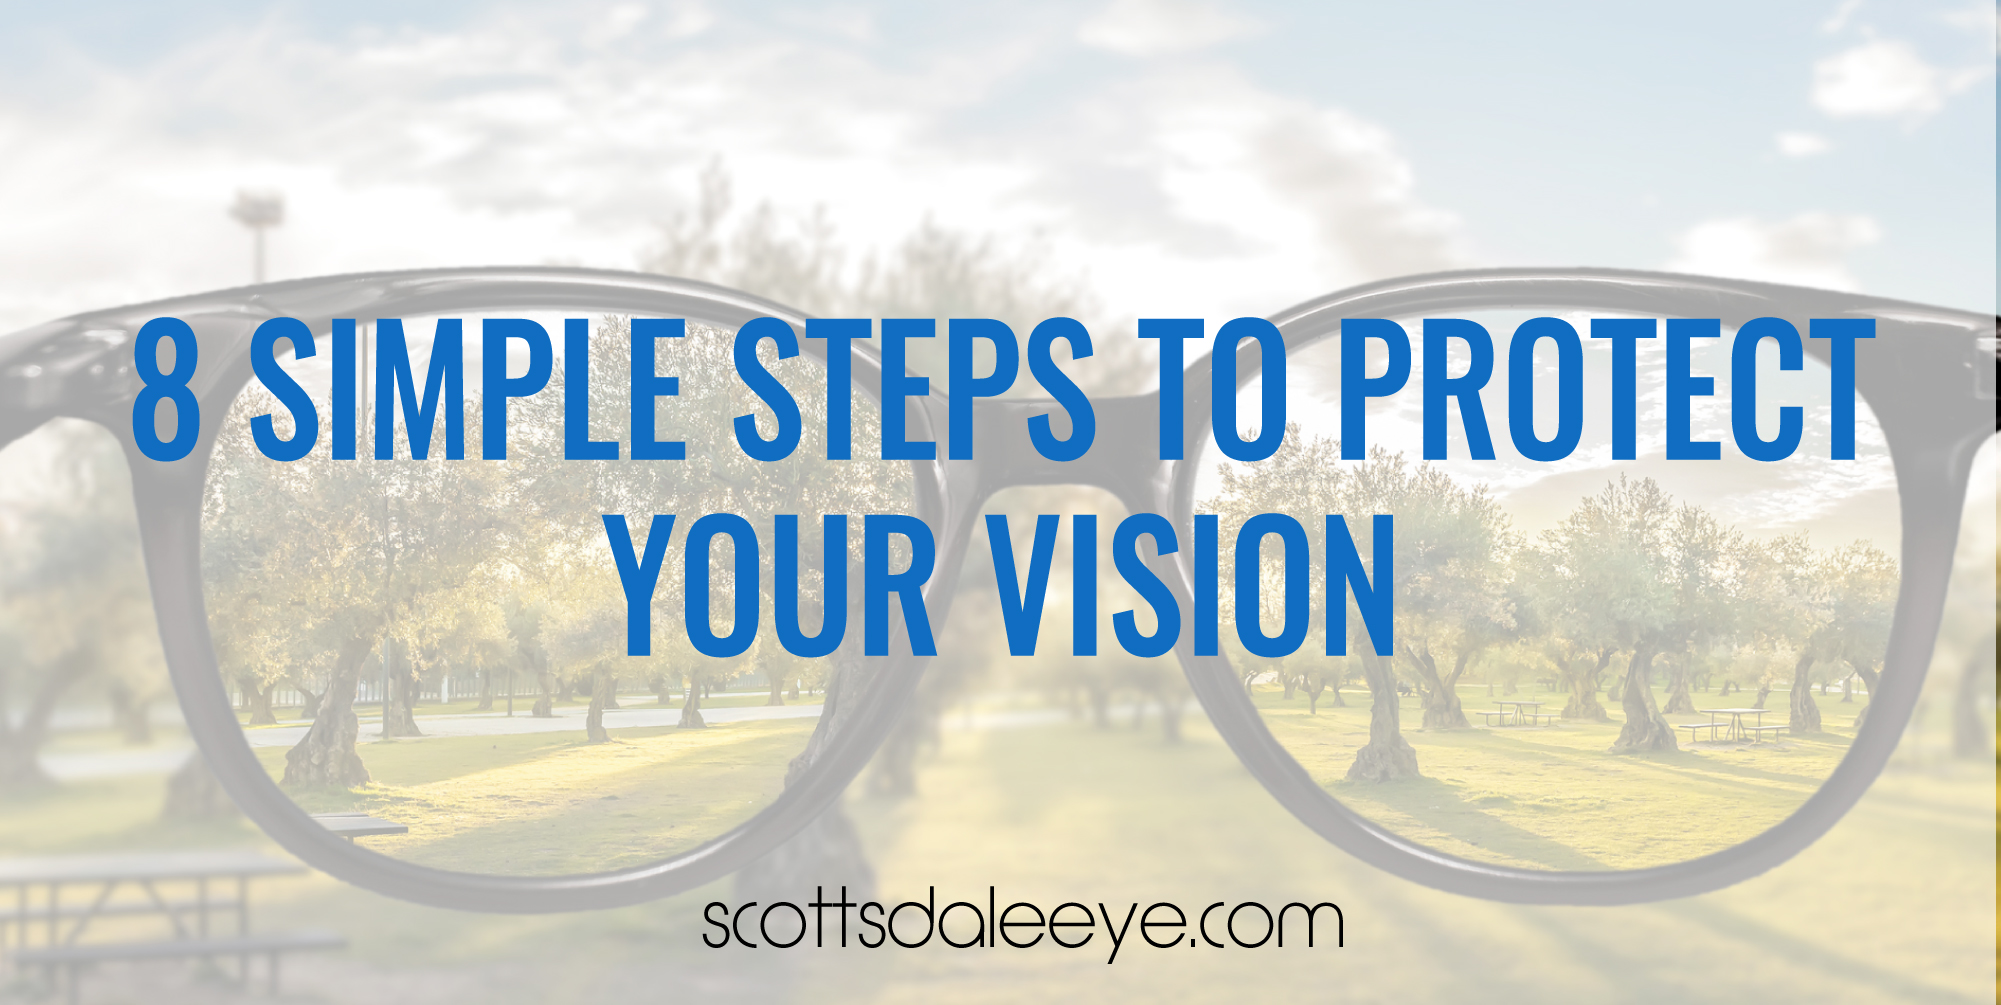 8 Things to Start Today to Protect Your Vision!